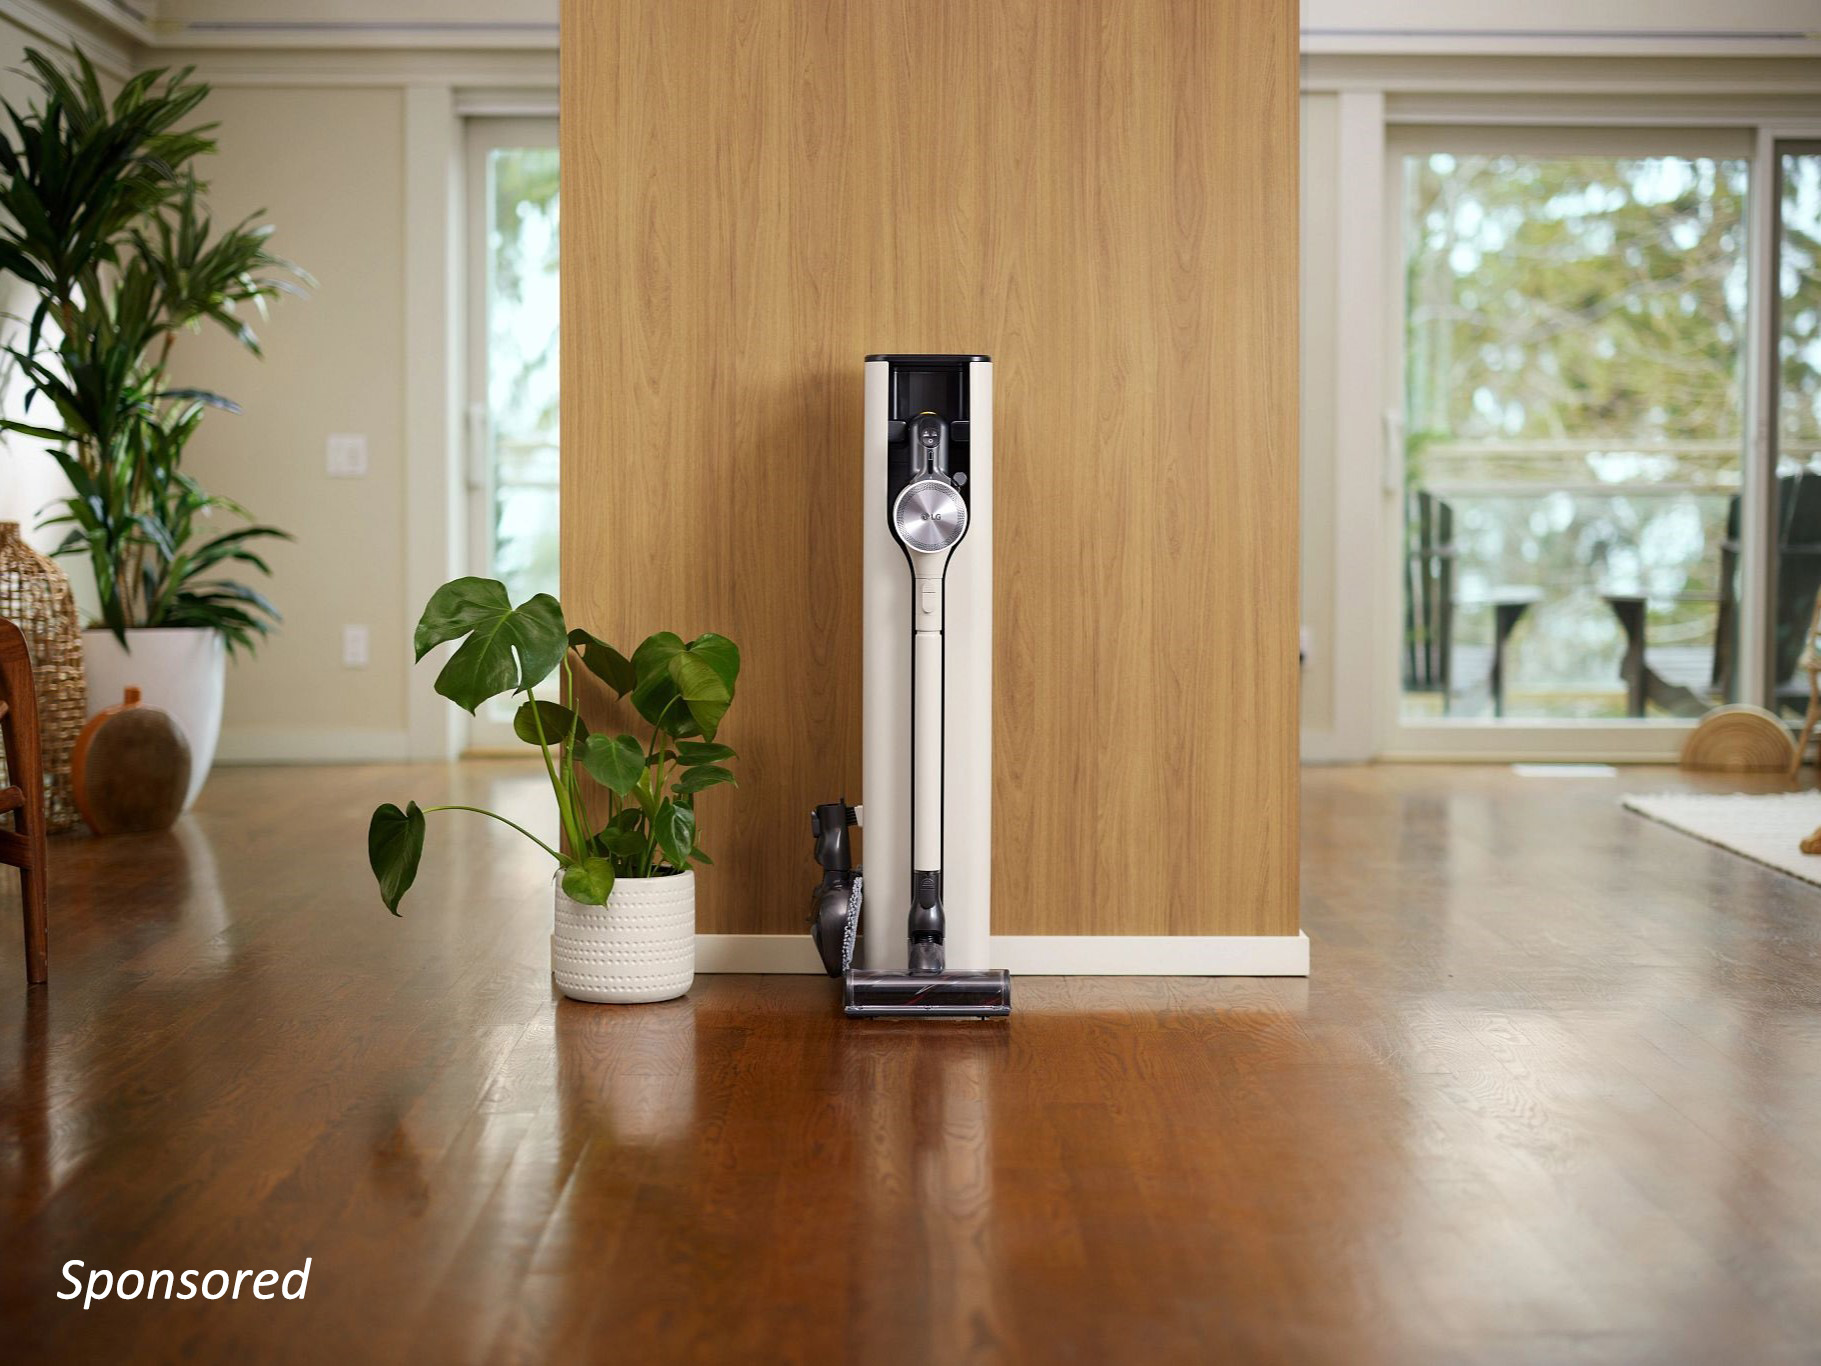 A939KBGS LG CordZero™ All in One cordless stick vacuum sponsored tag